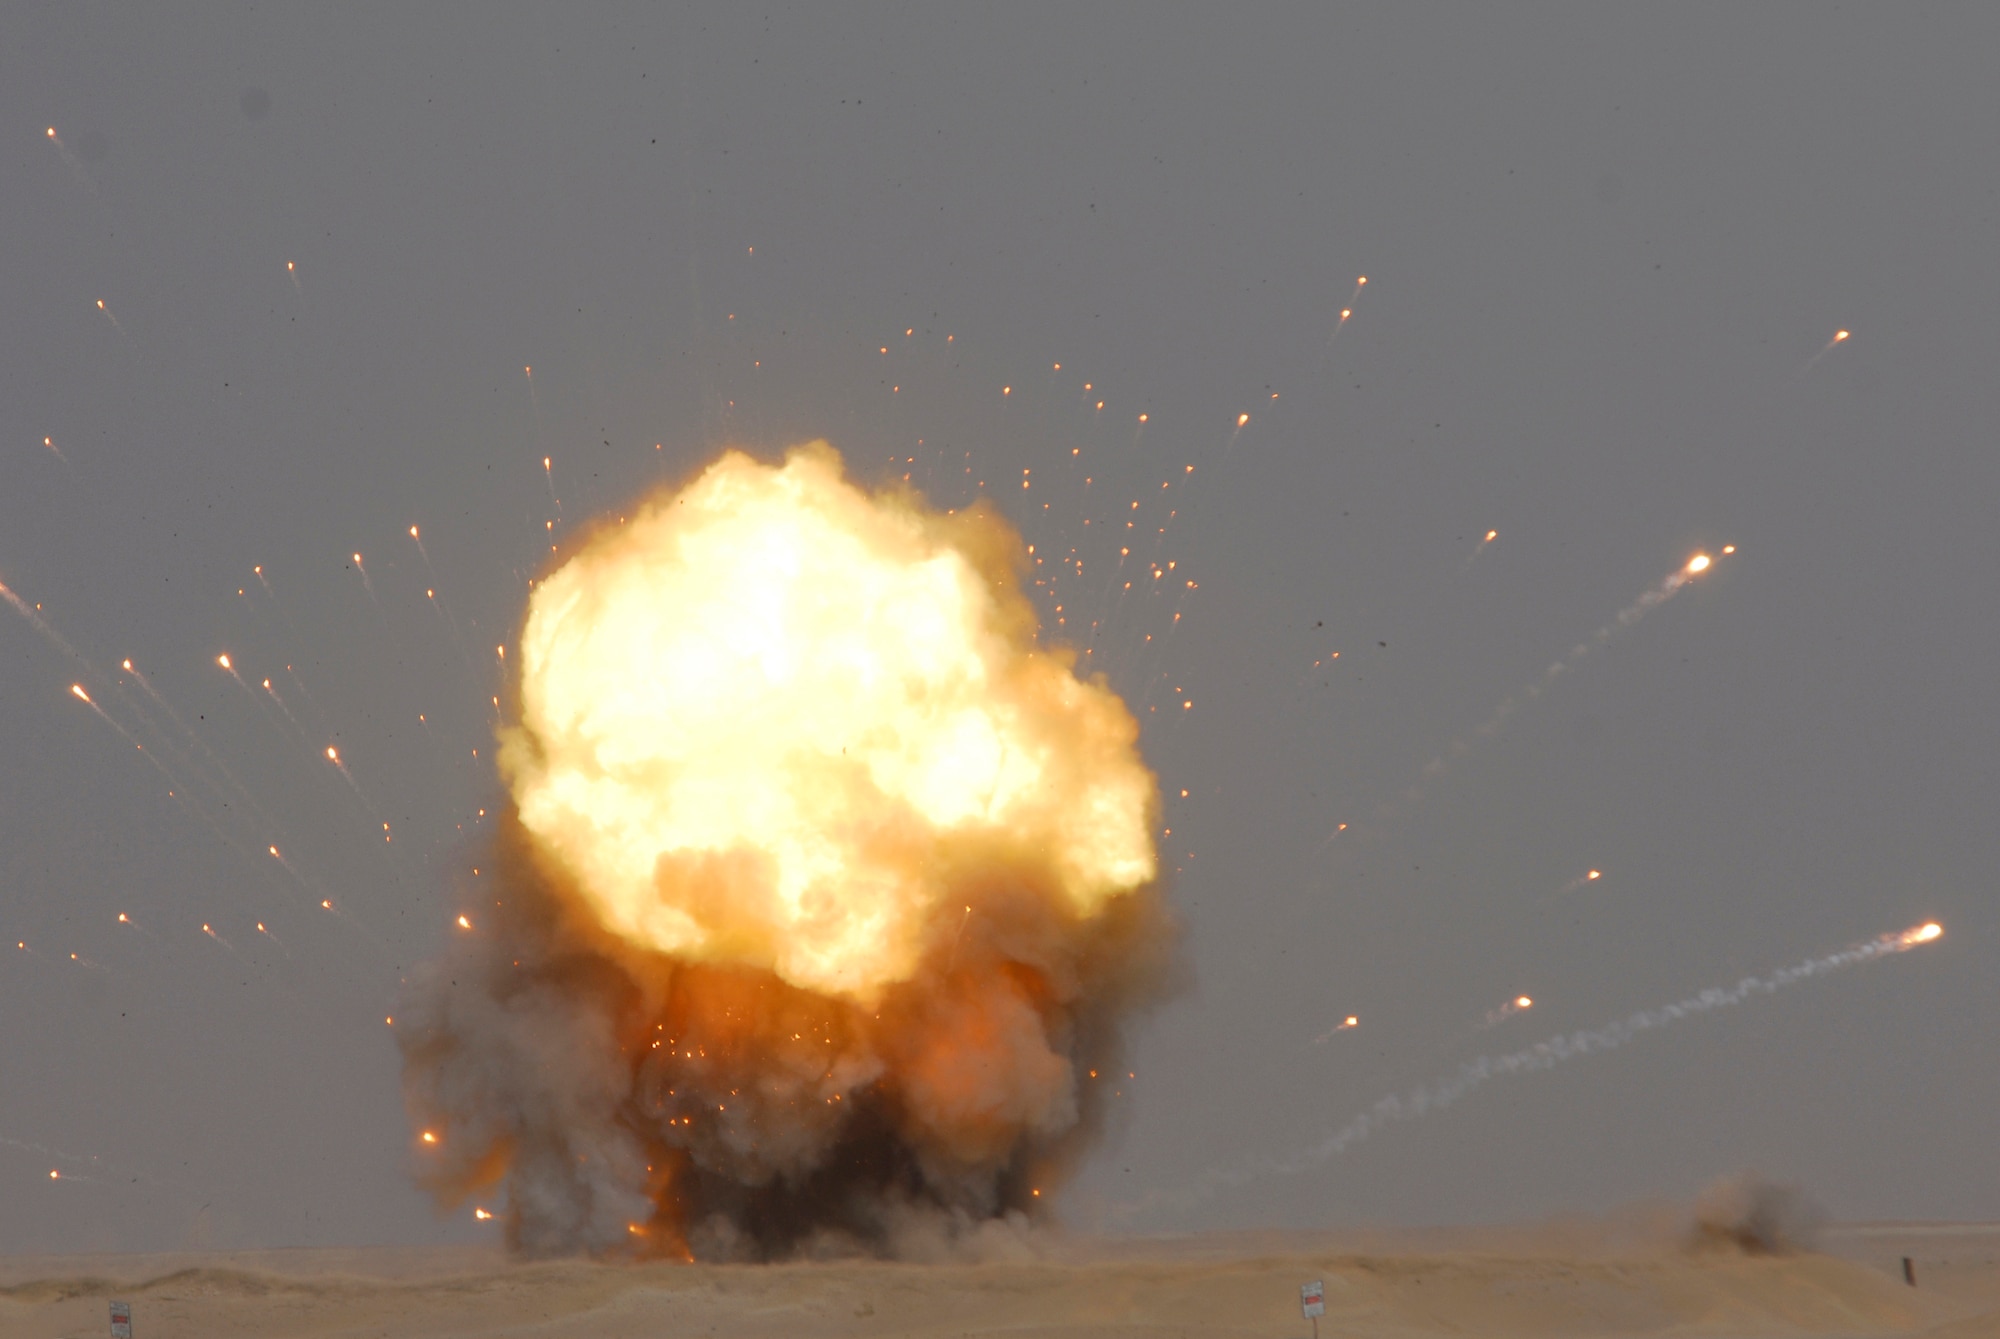 SOUTHWEST ASIA -- A fire ball rises into the sky during a controlled detonation performed by coalition forces from the Air Force?s 386th Expeditionary Civil Engineer Squadron and the Australian Army June 20, 2008, at an explosive ordnance disposal range in the Persian Gulf Region. The joint detonation also provided an opportunity for the coalition forces to enhance relations while learning some of the slight differences in operating procedures. (U.S. Air Force photo/ Staff Sgt. Patrick Dixon)